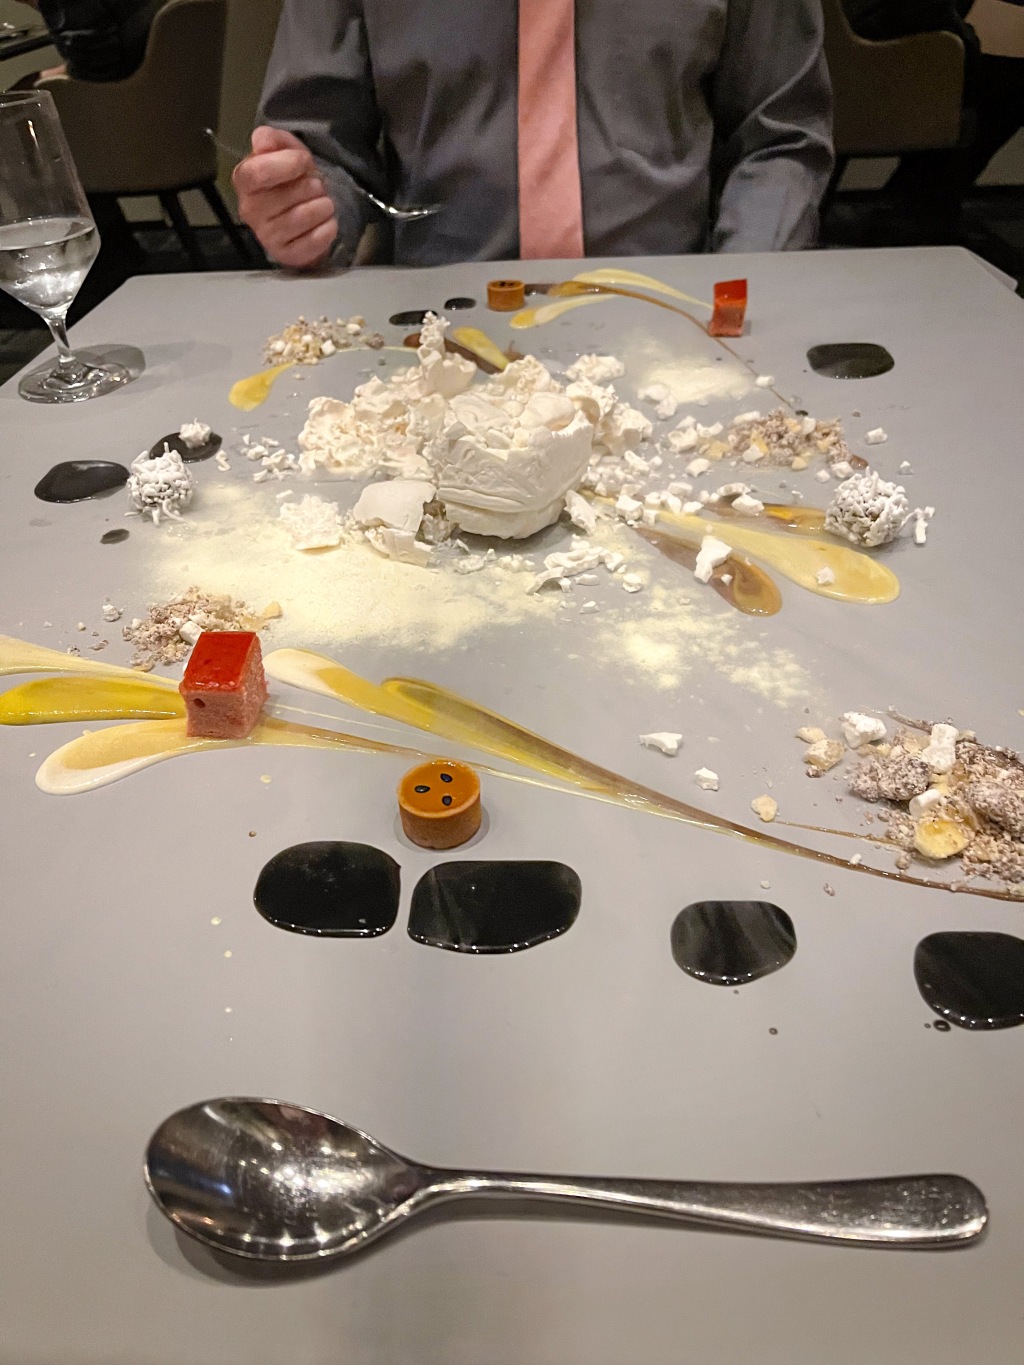 Our Dinner at Alinea